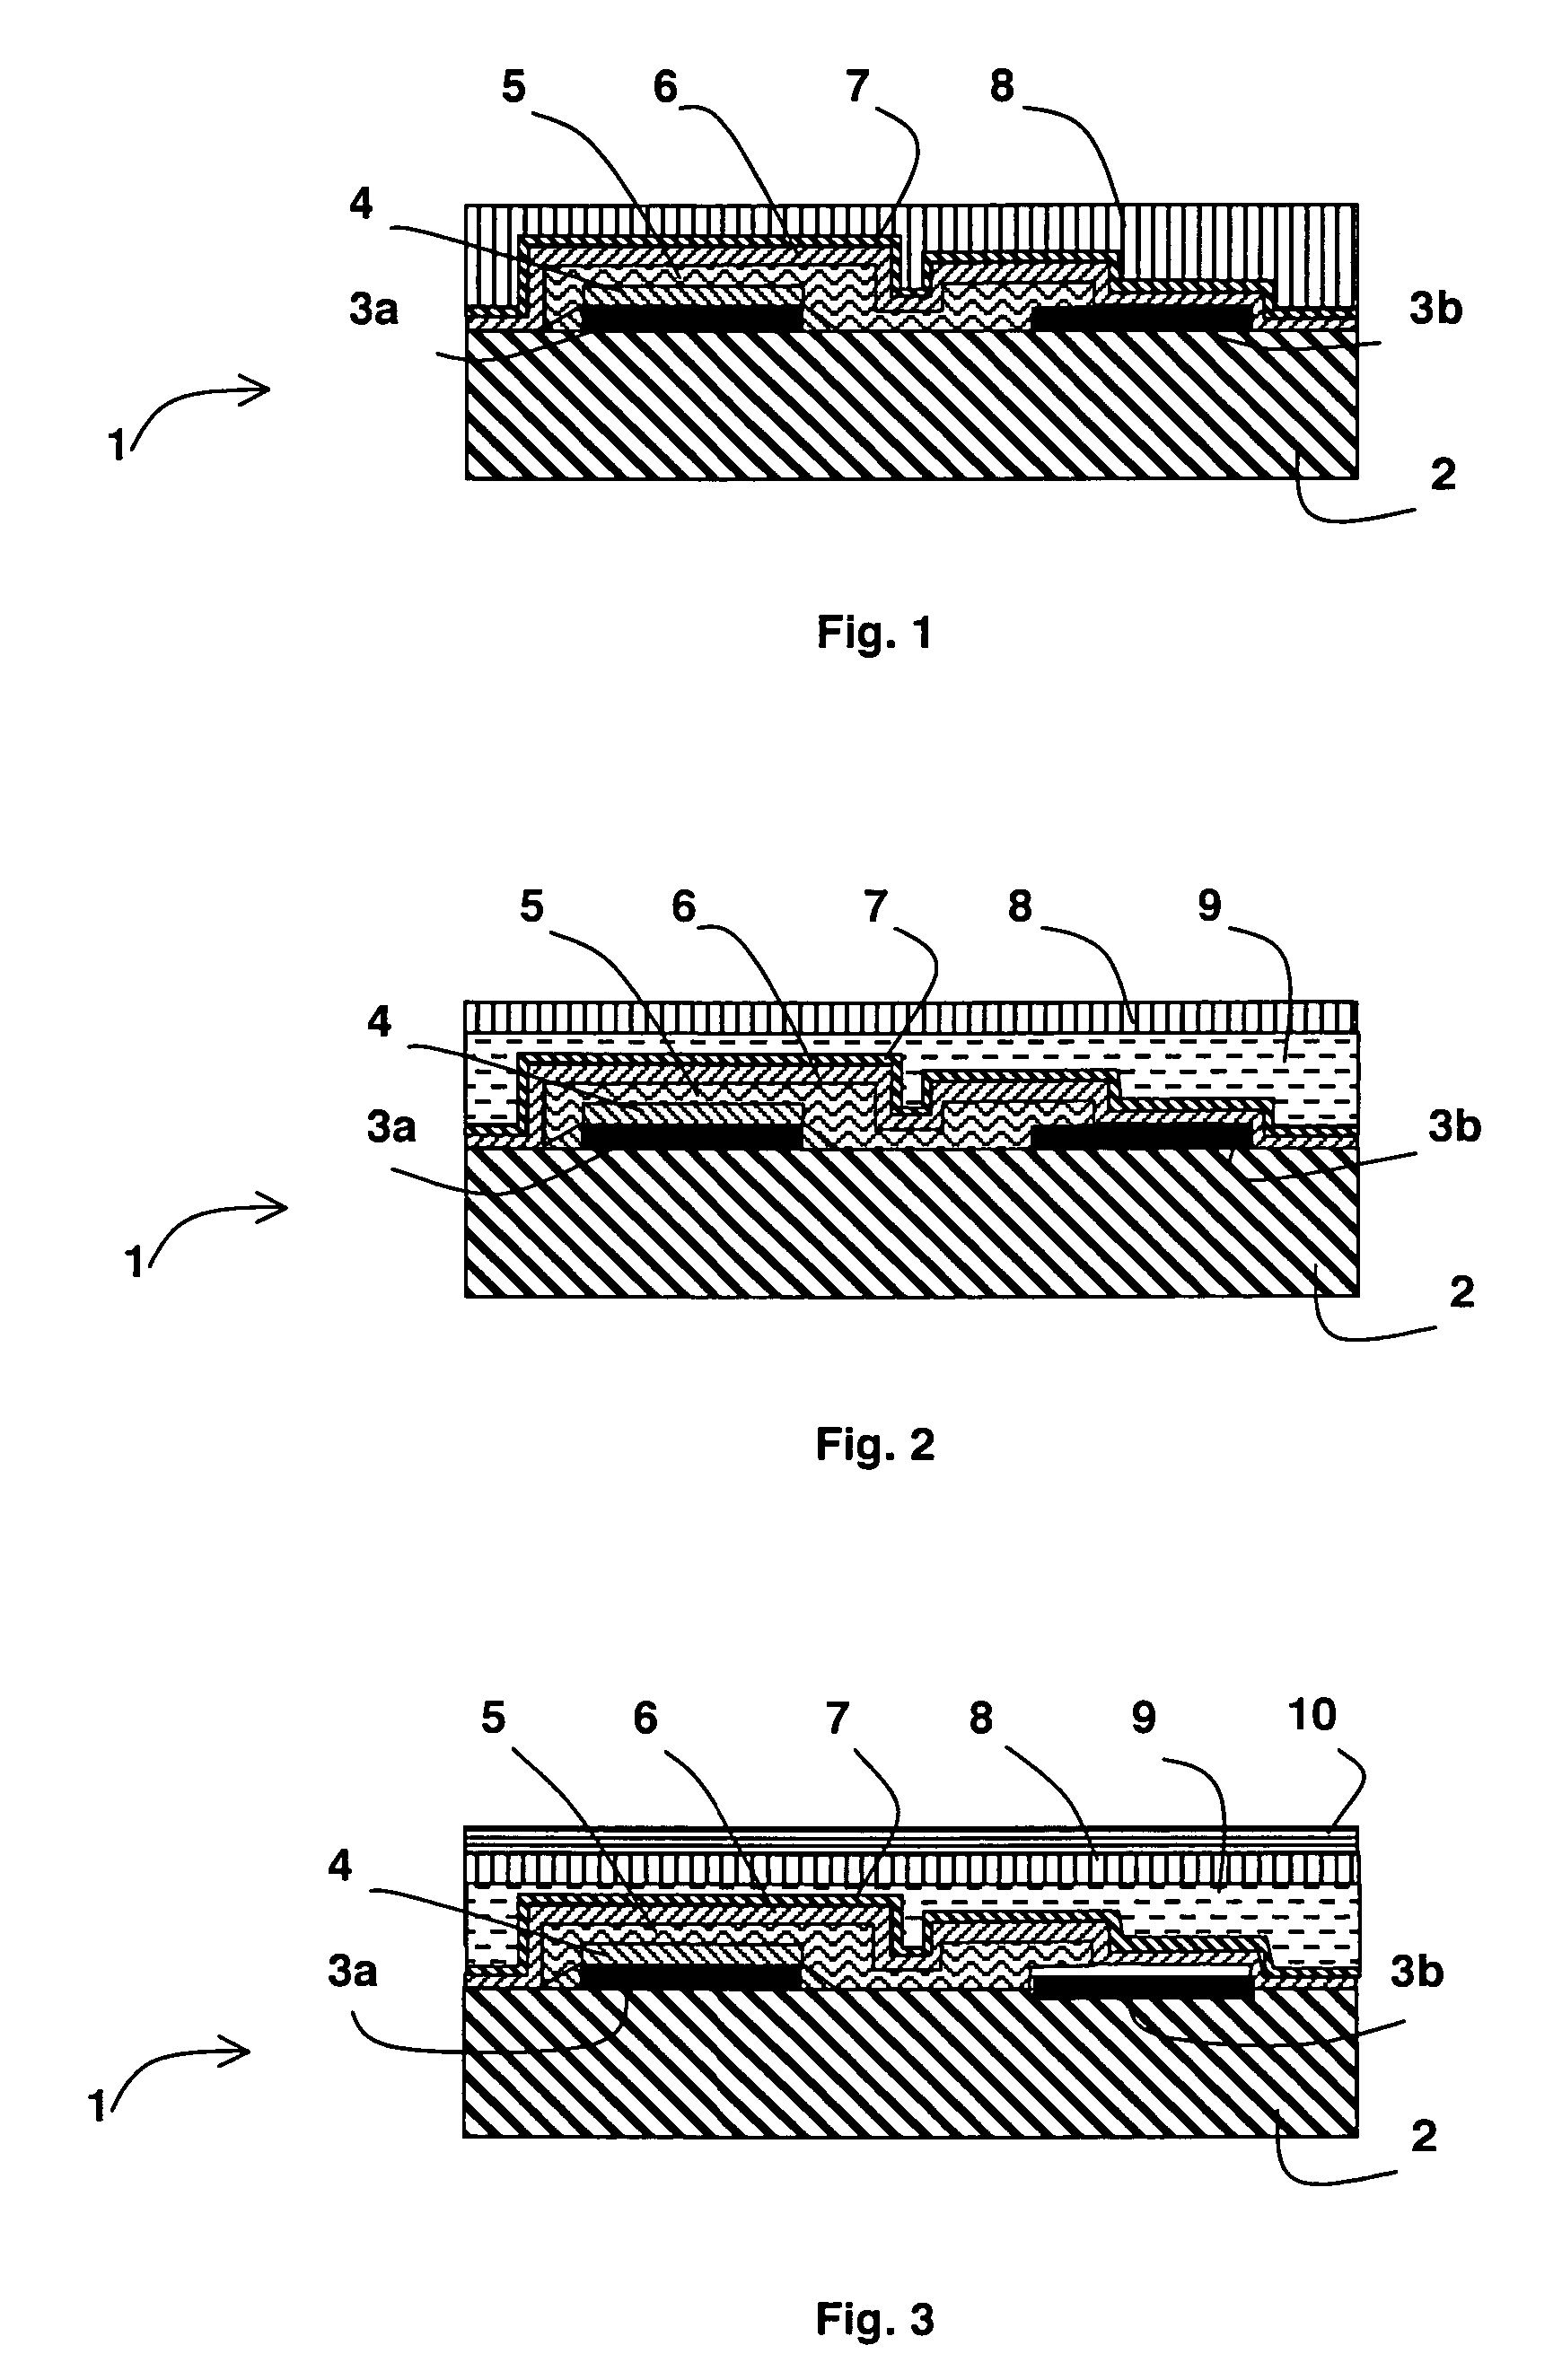 Lithium microbattery provided with a protective envelope, and method for producing one such microbattery